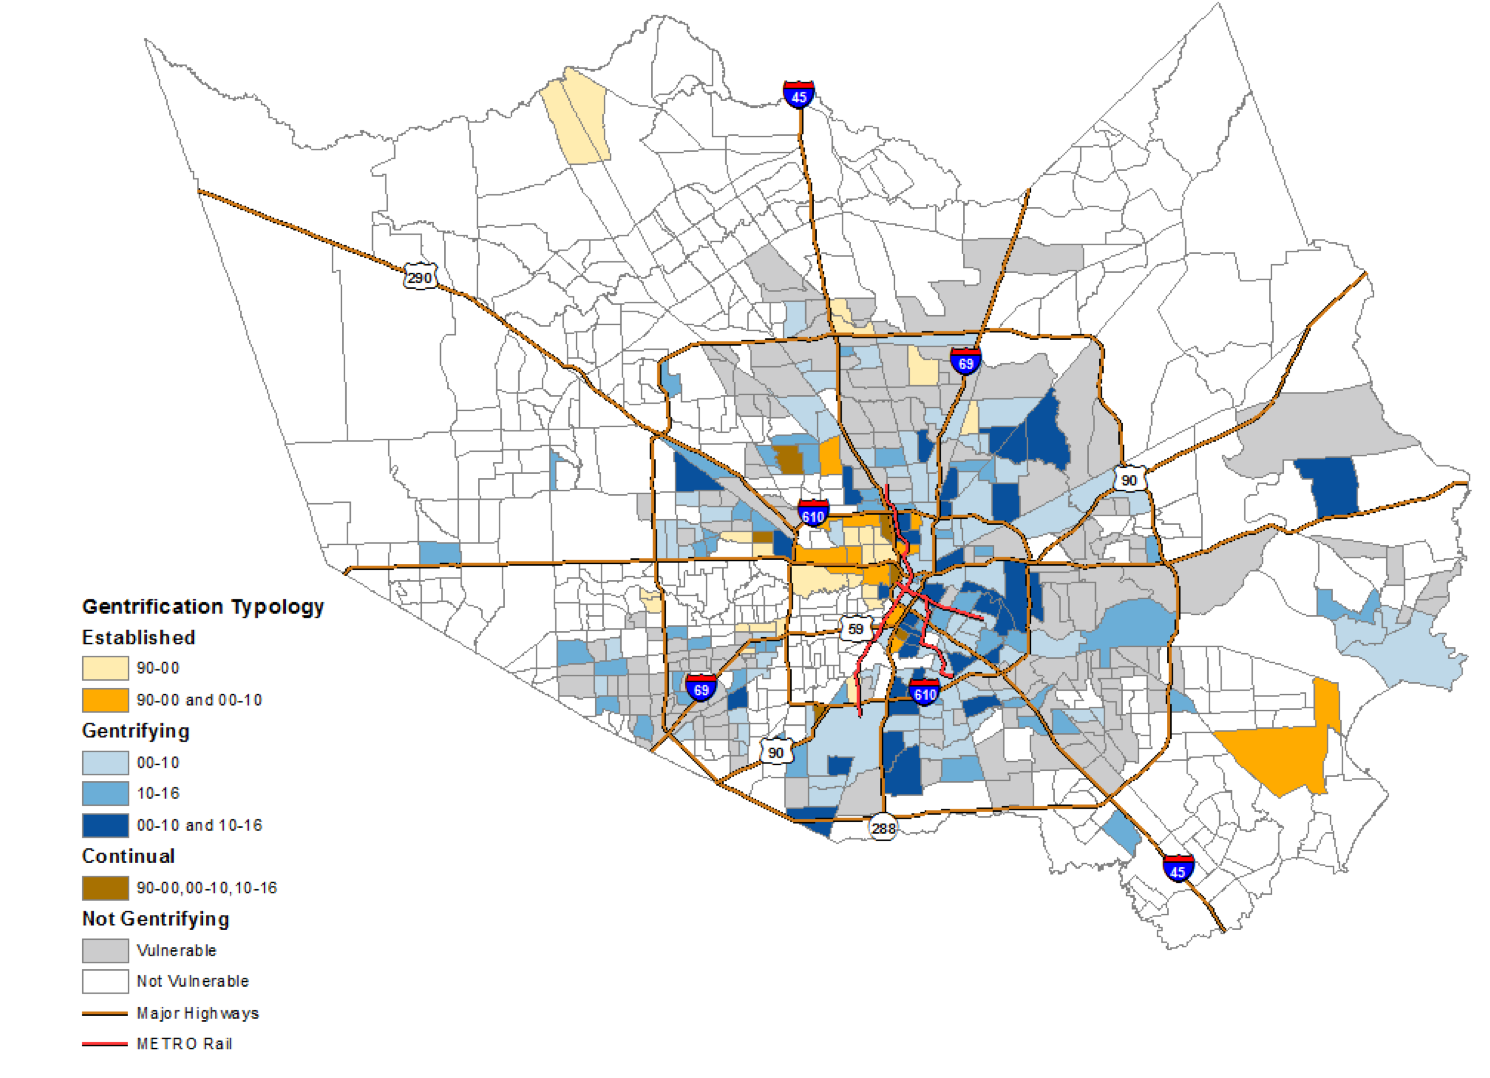 Map of gentrification typology across Harris County